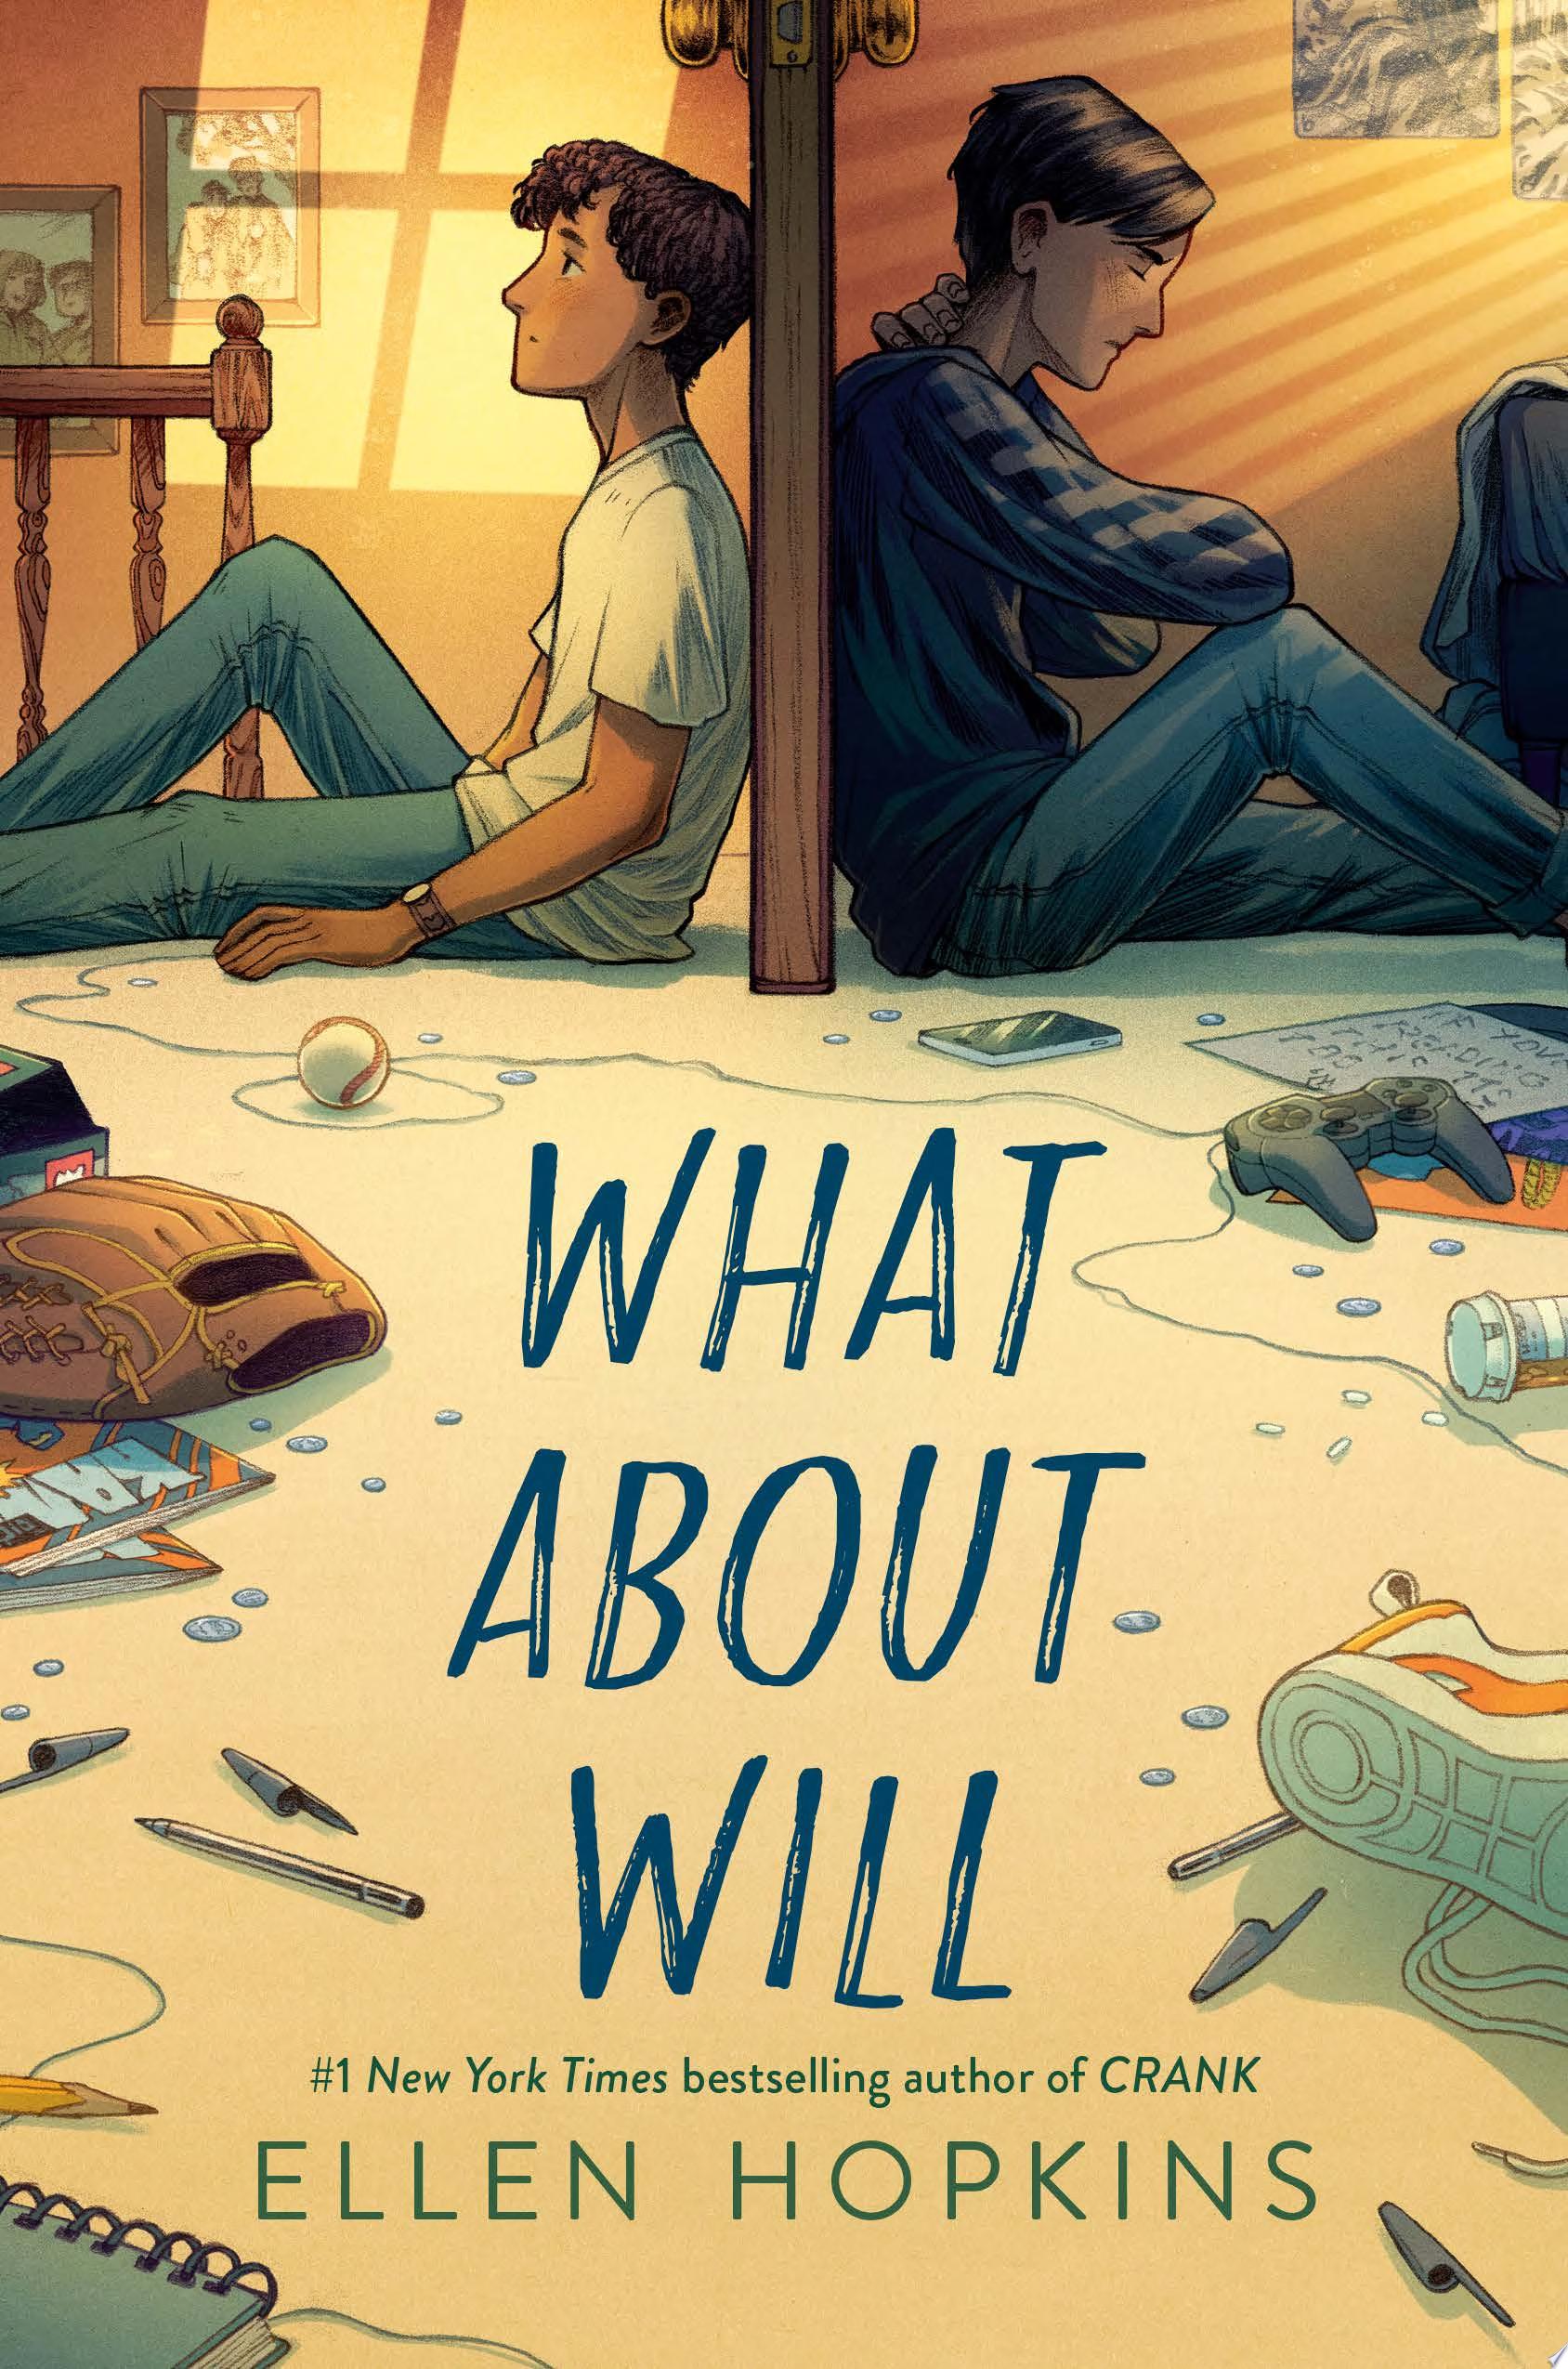 Image for "What About Will"